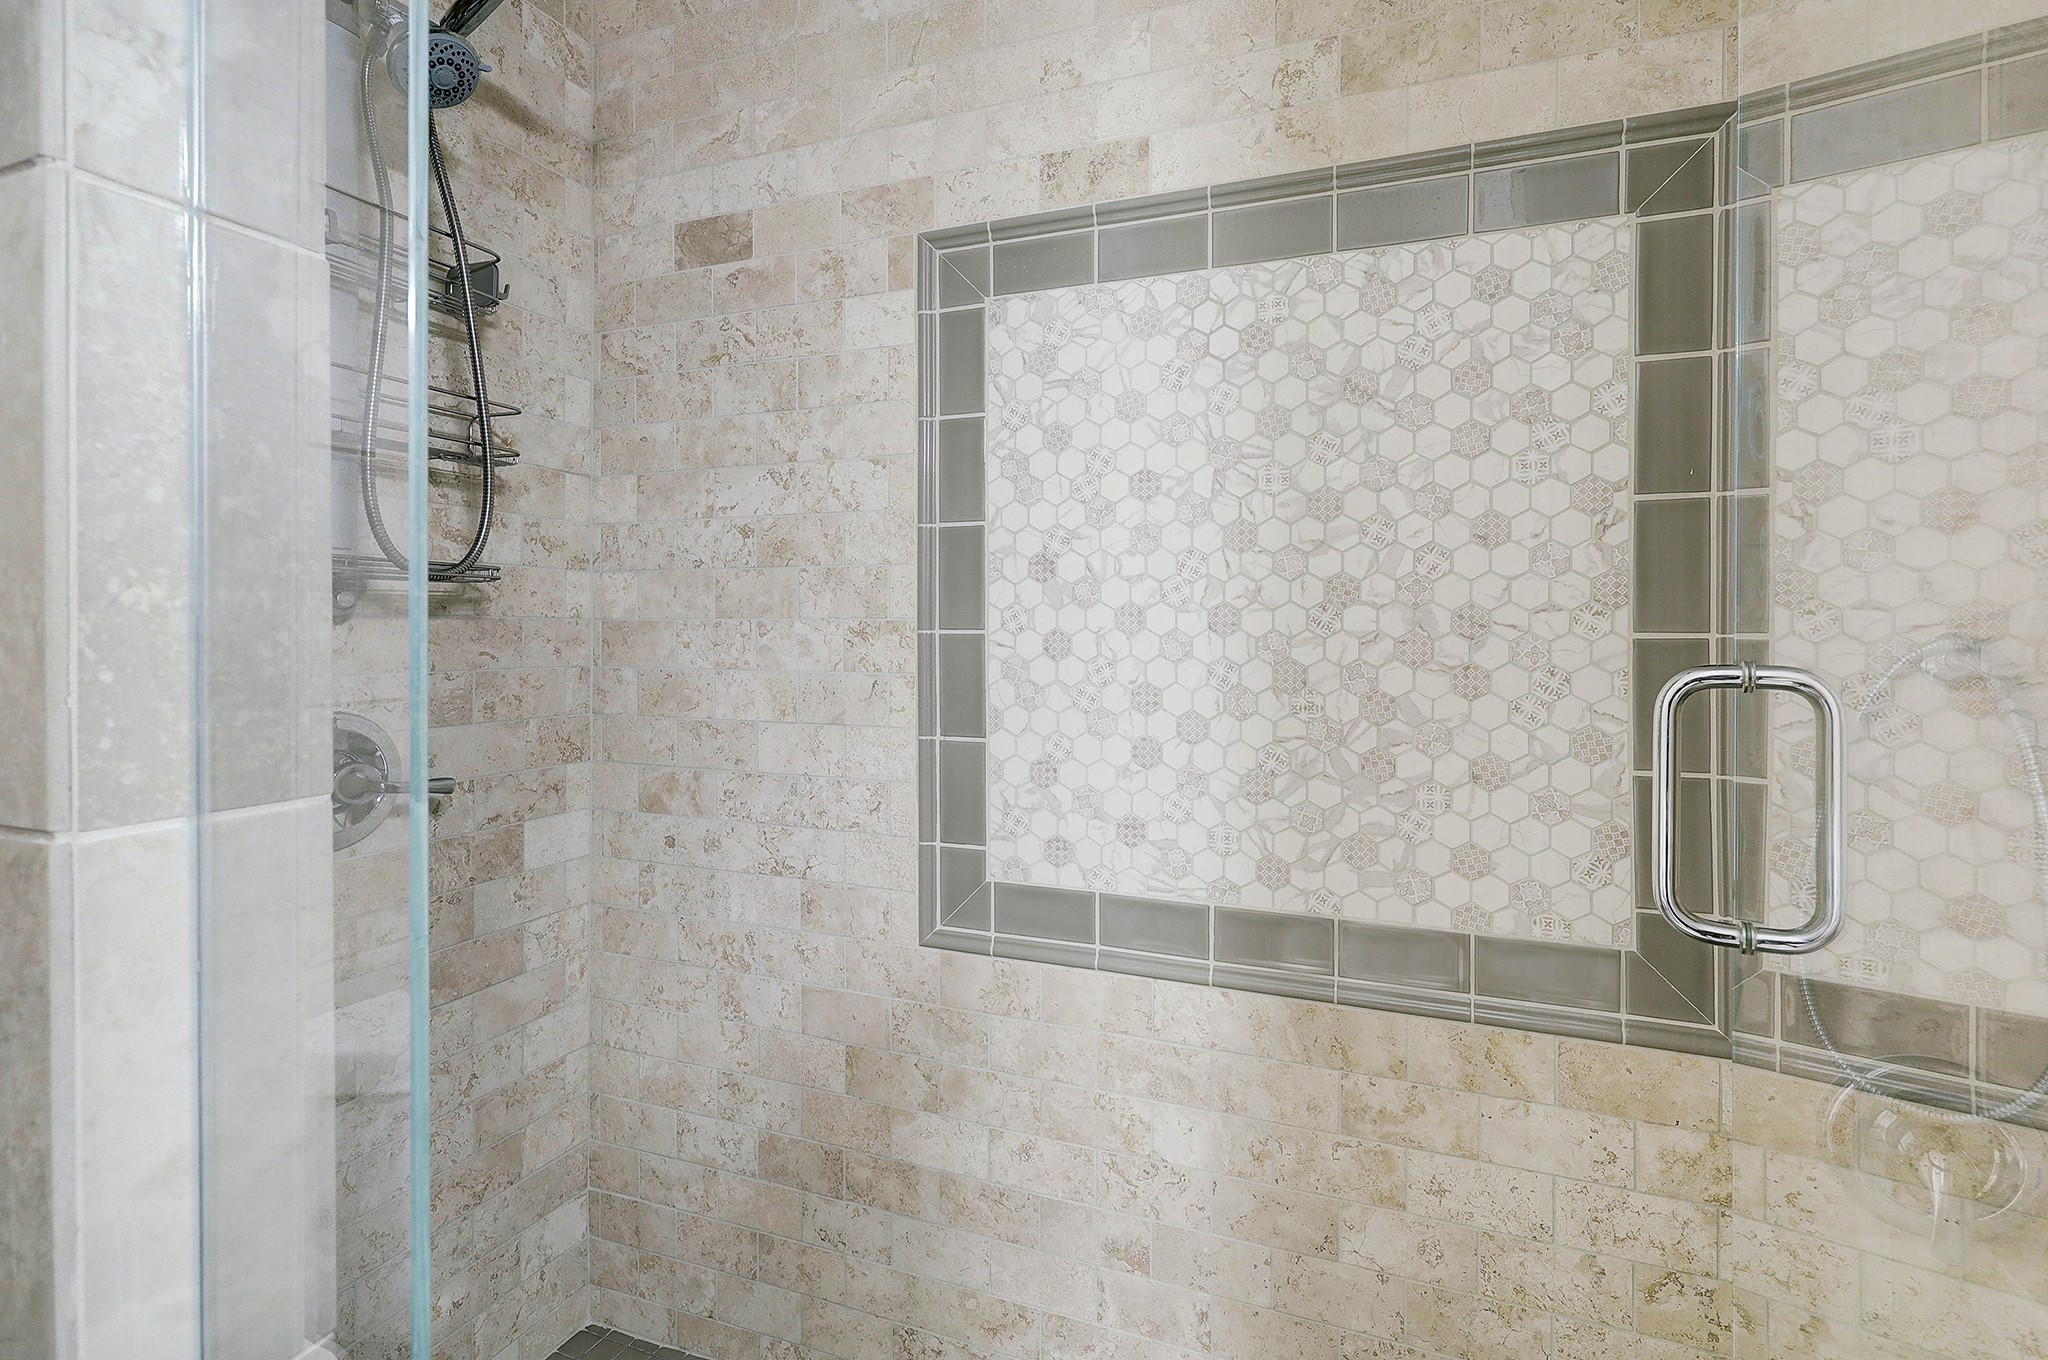 A large glass enclosed shower keeps the space light and airy.